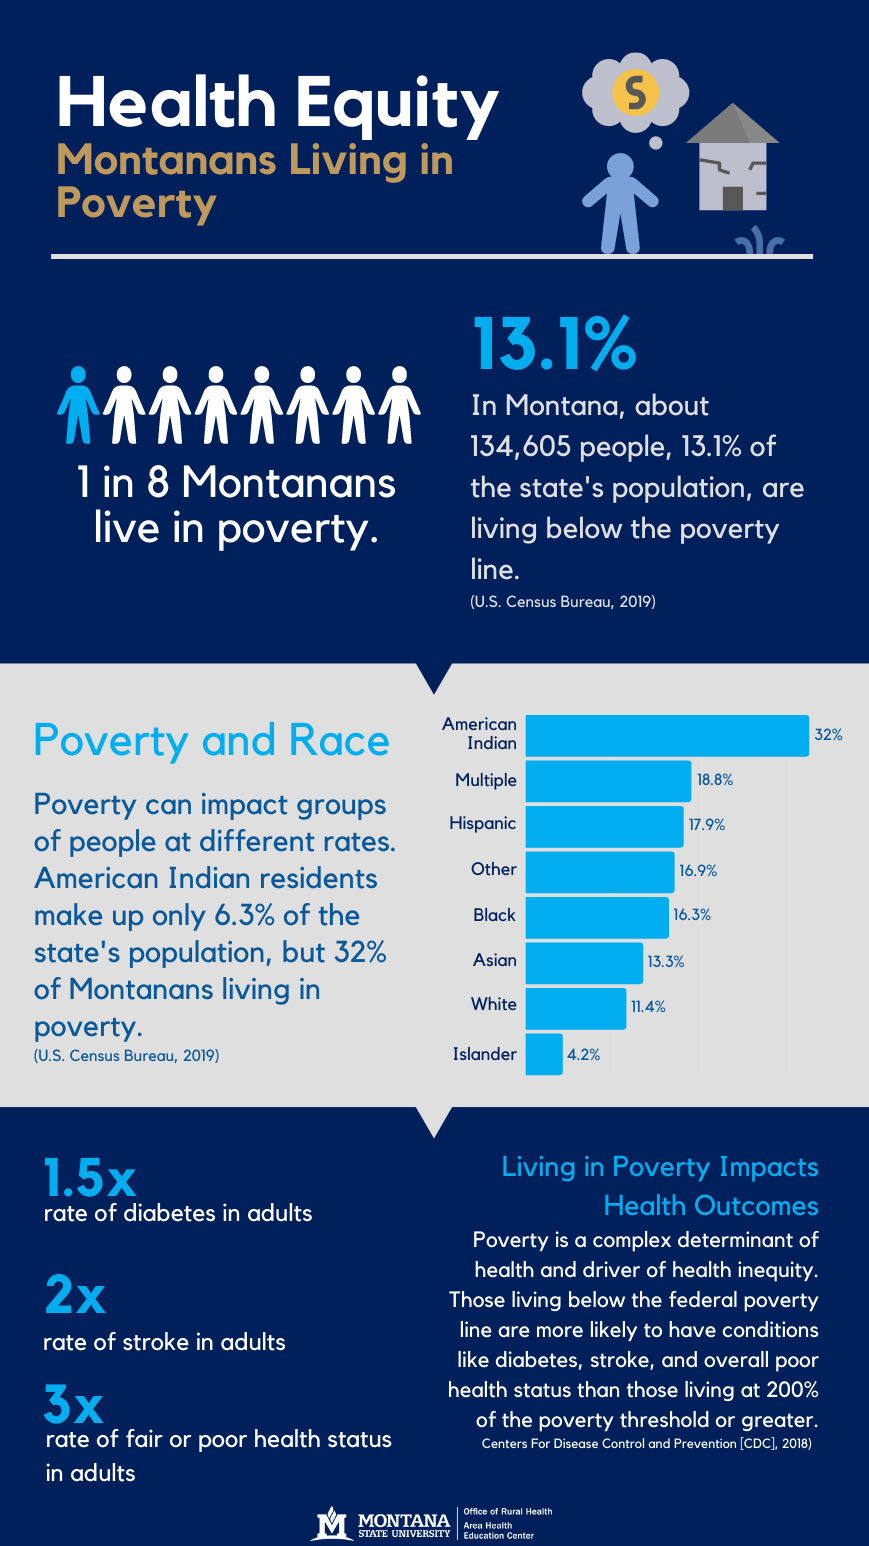 Health Equity - Montanans Living in Poverty. In Montana, In Montana, about  134,605 people, 13.1% of the state's population, are living below the poverty line. (U.S. Census Bureau, 2019). 1 in 8 Montanans live in poverty. Poverty and Race- Poverty can impact groups of people at different rates. American Indian residents make up only 6.3% of the state's population, but 32% of Montanans living in poverty.  (U.S. Census Bureau, 2019). 18.8% of people of Multiple races live in poverty, 17.9% of Hispanics, 16.9% of Other, 16.3% of Black, 13.3% of Asian, 11.4% of White, and 4.2% of Islander populations. Living in Poverty Impacts Health Outcomes - Poverty is a complex determinant of health and driver of health inequity. Those living below the federal poverty line are more likely to have conditions like diabetes, stroke, and overall poor health status than those living at 200% of the poverty threshold or greater. Centers For Disease Control and Prevention [CDC], 2018). 1.5x rate of diabetes in adults. 2x rate of stroke in adults. 3x rate of fair or poor health status in adults. 